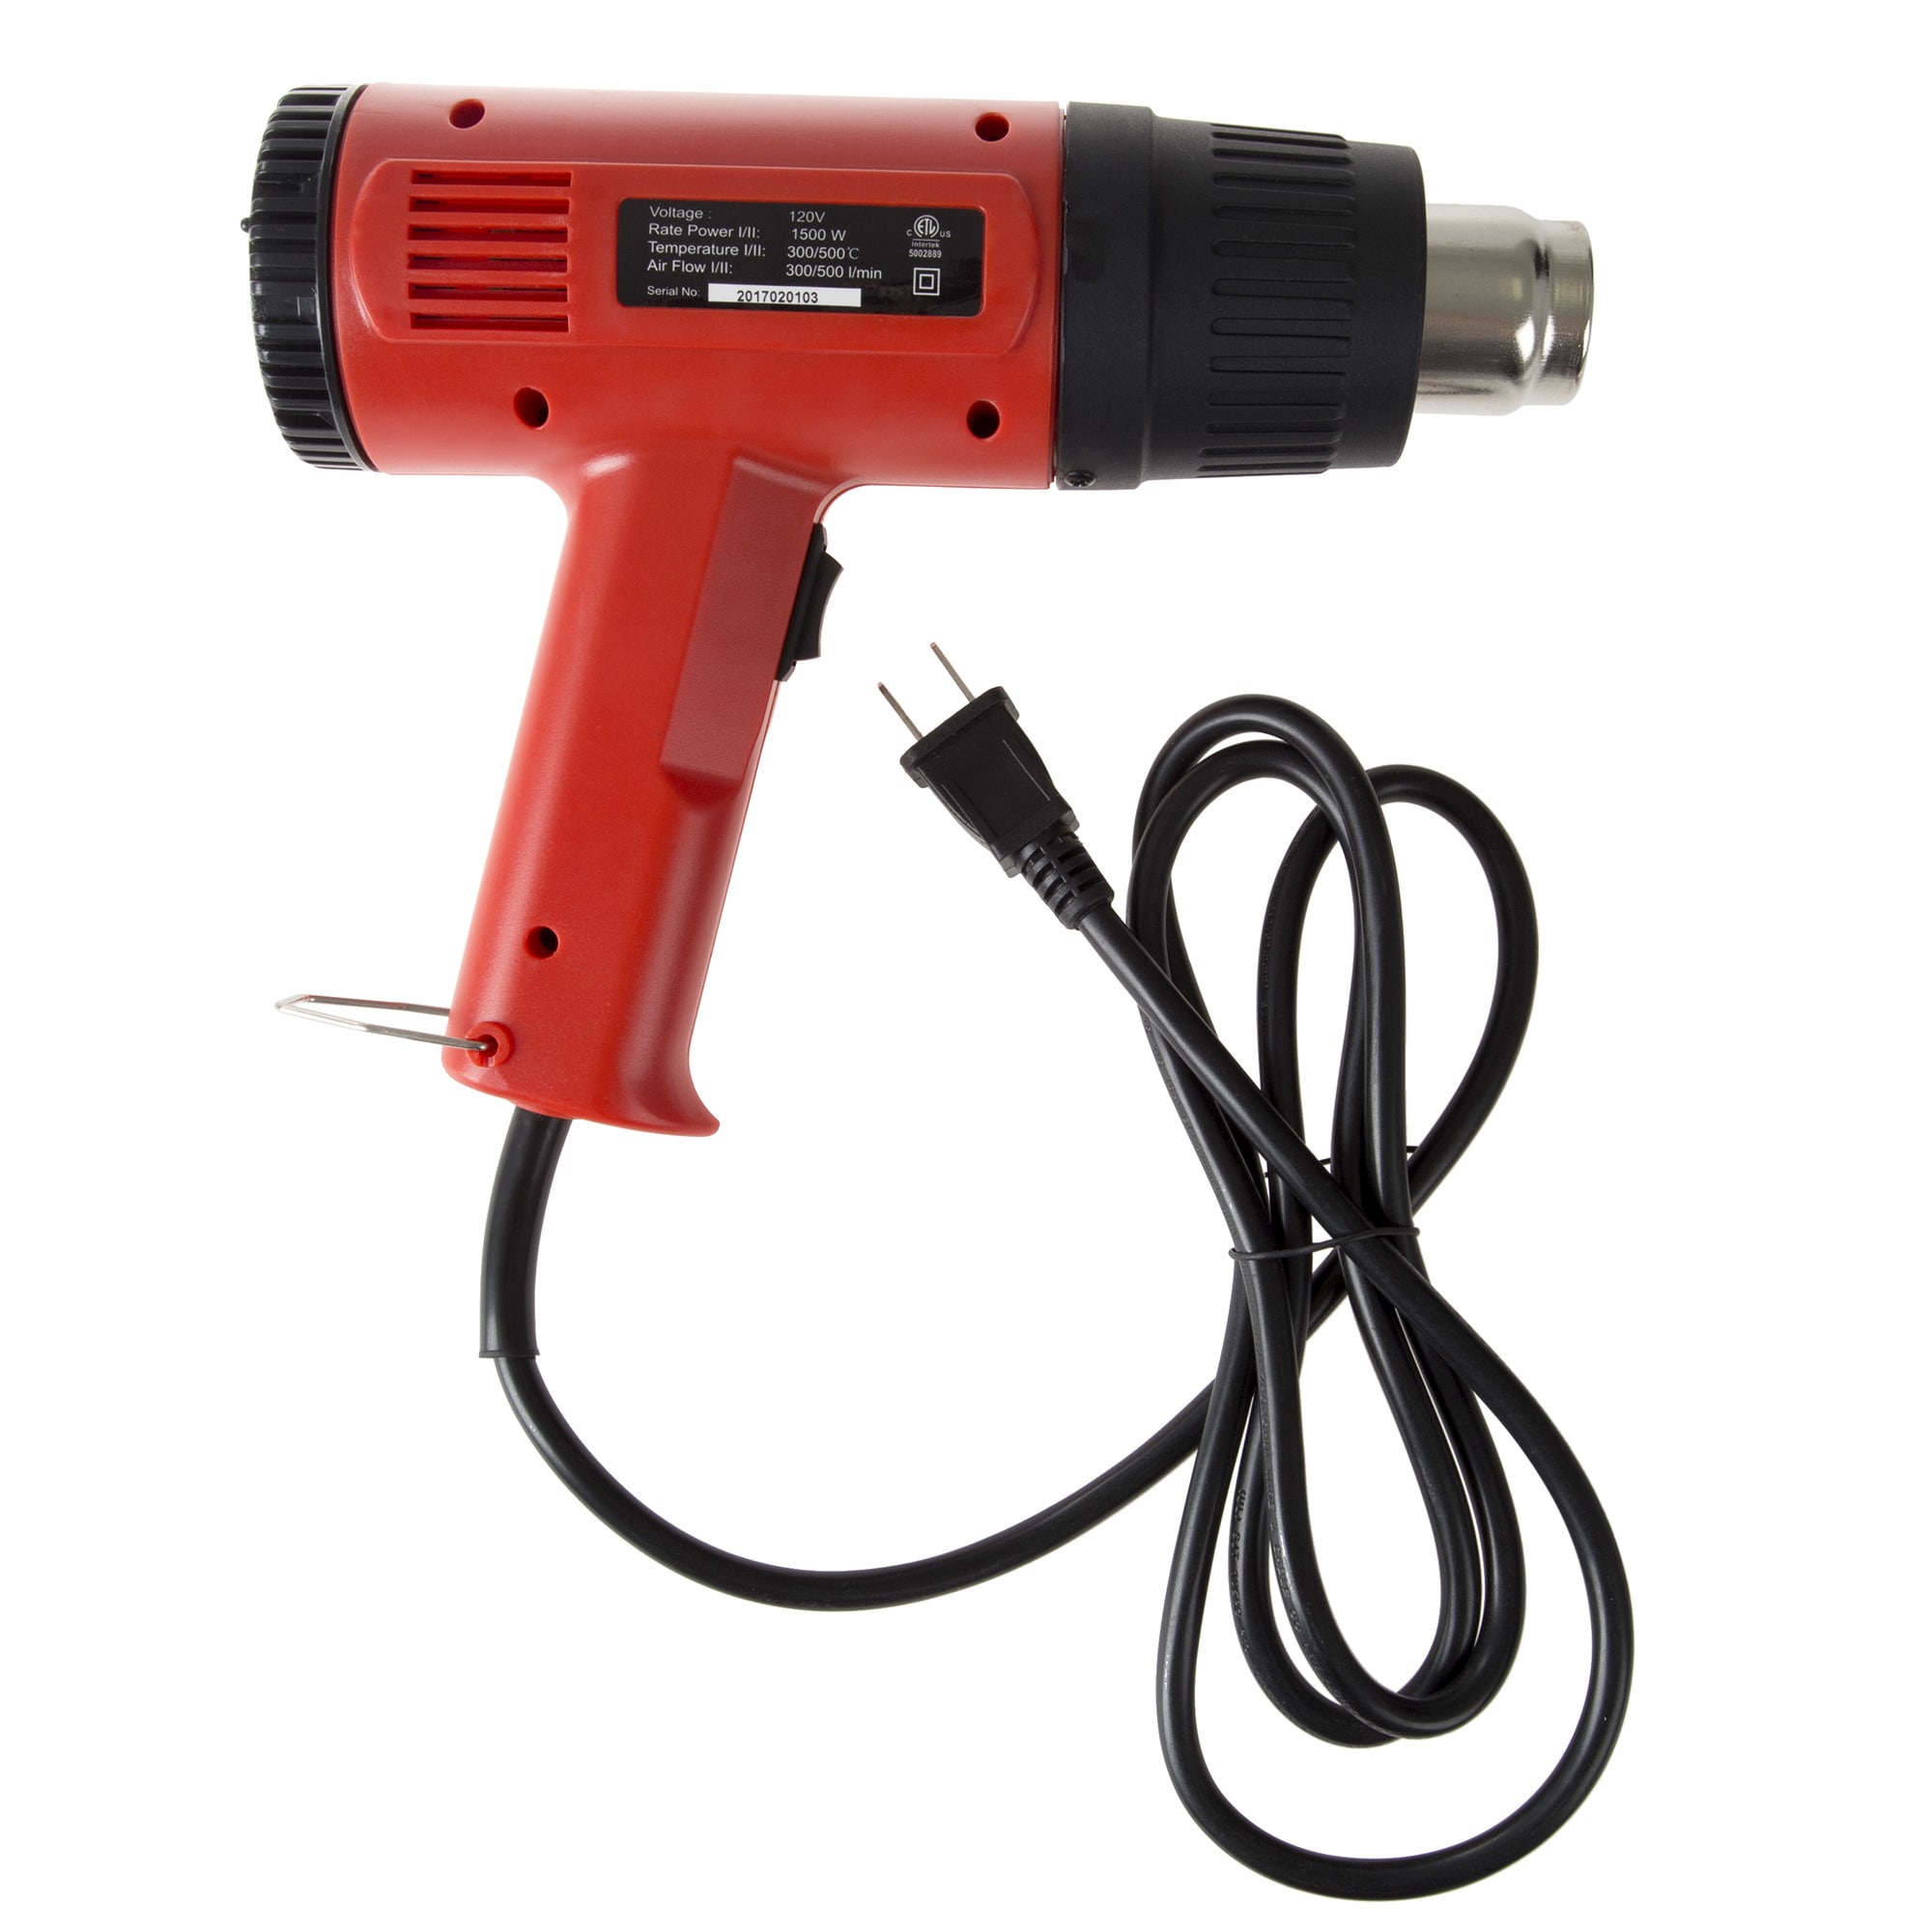 Dual Temperature Heat Gun - 1500W, 120V Heating Tool for DIY, Home  Improvement, and Contractors by Stalwart (Red)